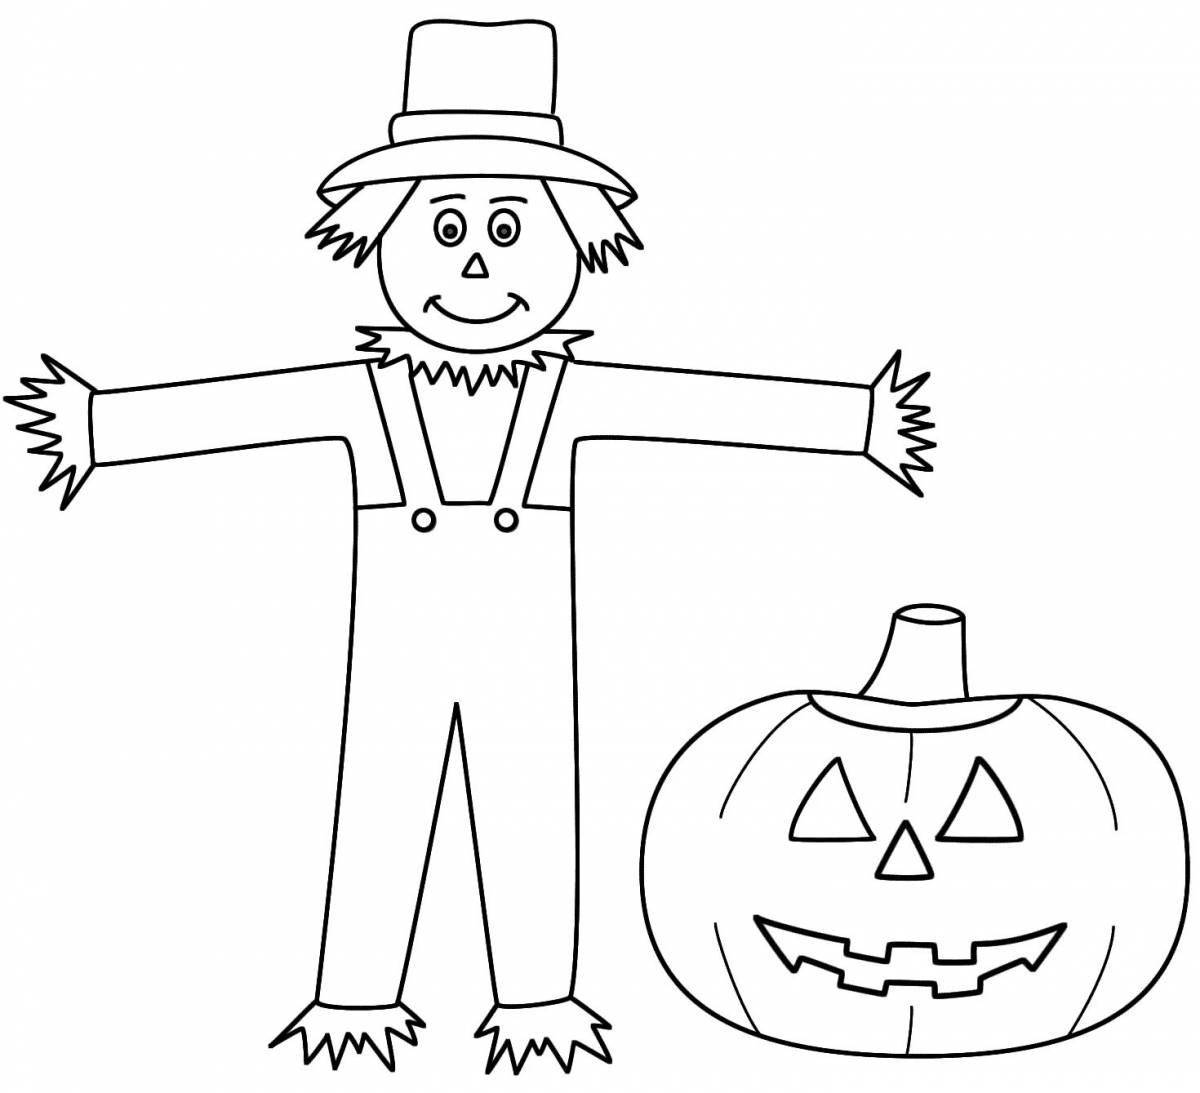 Sweet stuffed animals coloring pages for kids